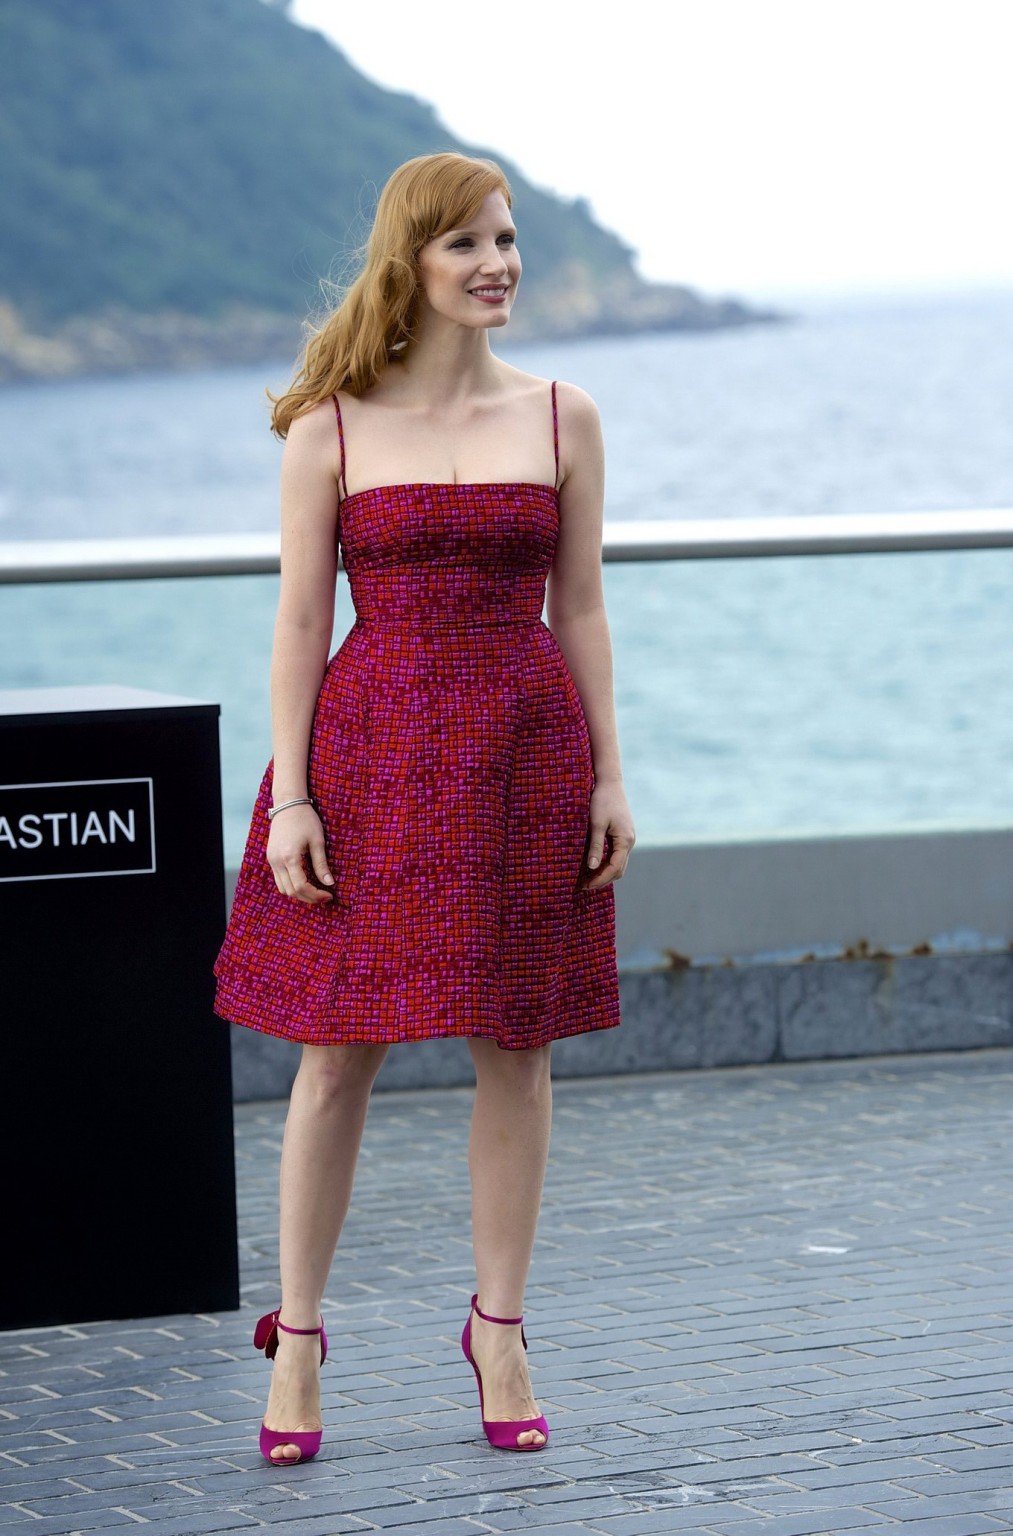 Jessica Chastain showing cleavage at The Dissapearance of Eleanor Rigby photocal #75184918